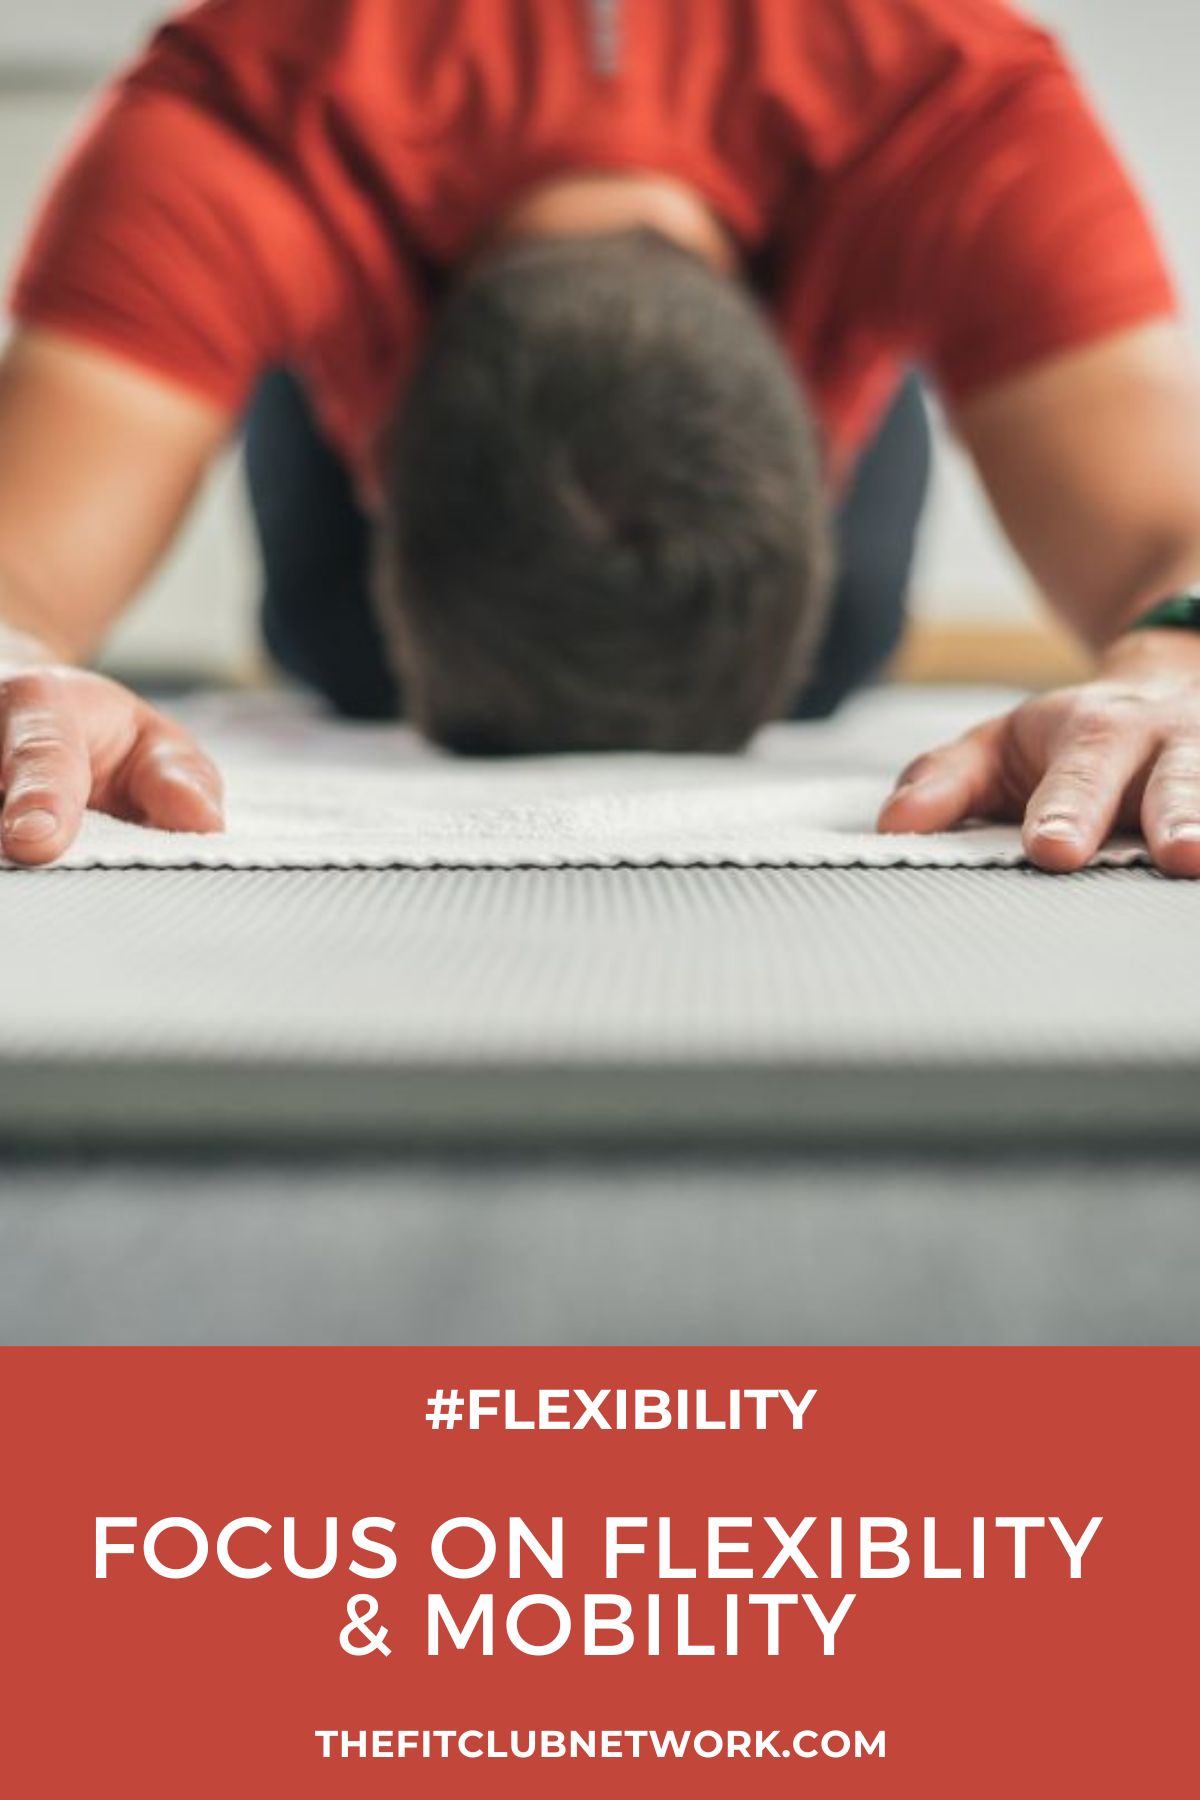 Focus on Flexiblity and Mobility